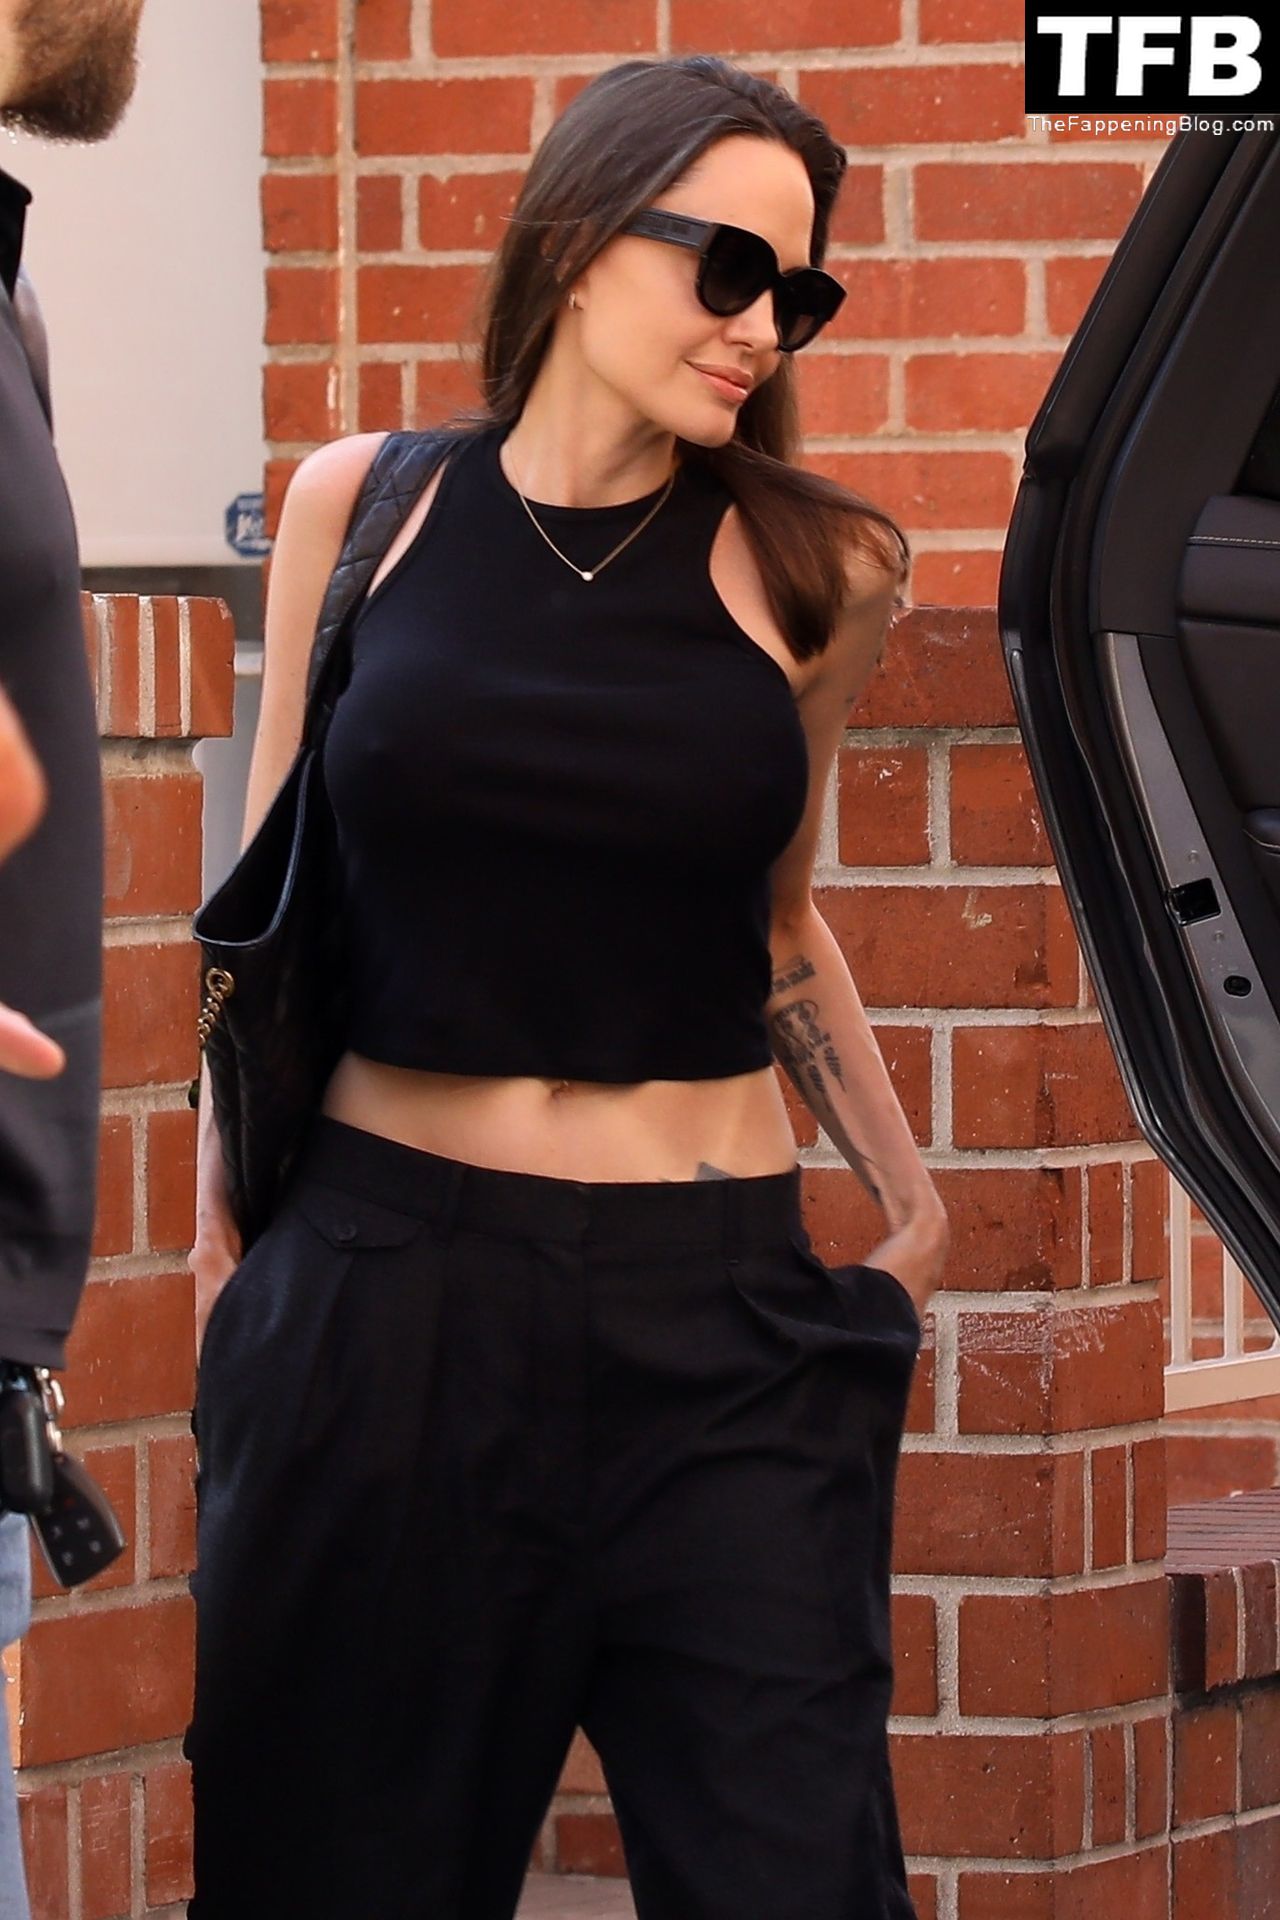 Angelina Jolie Braless The Fappening Blog 6 - Angelina Jolie Shows Off Her Tight Tummy Leaving an Office Building (33 Photos)